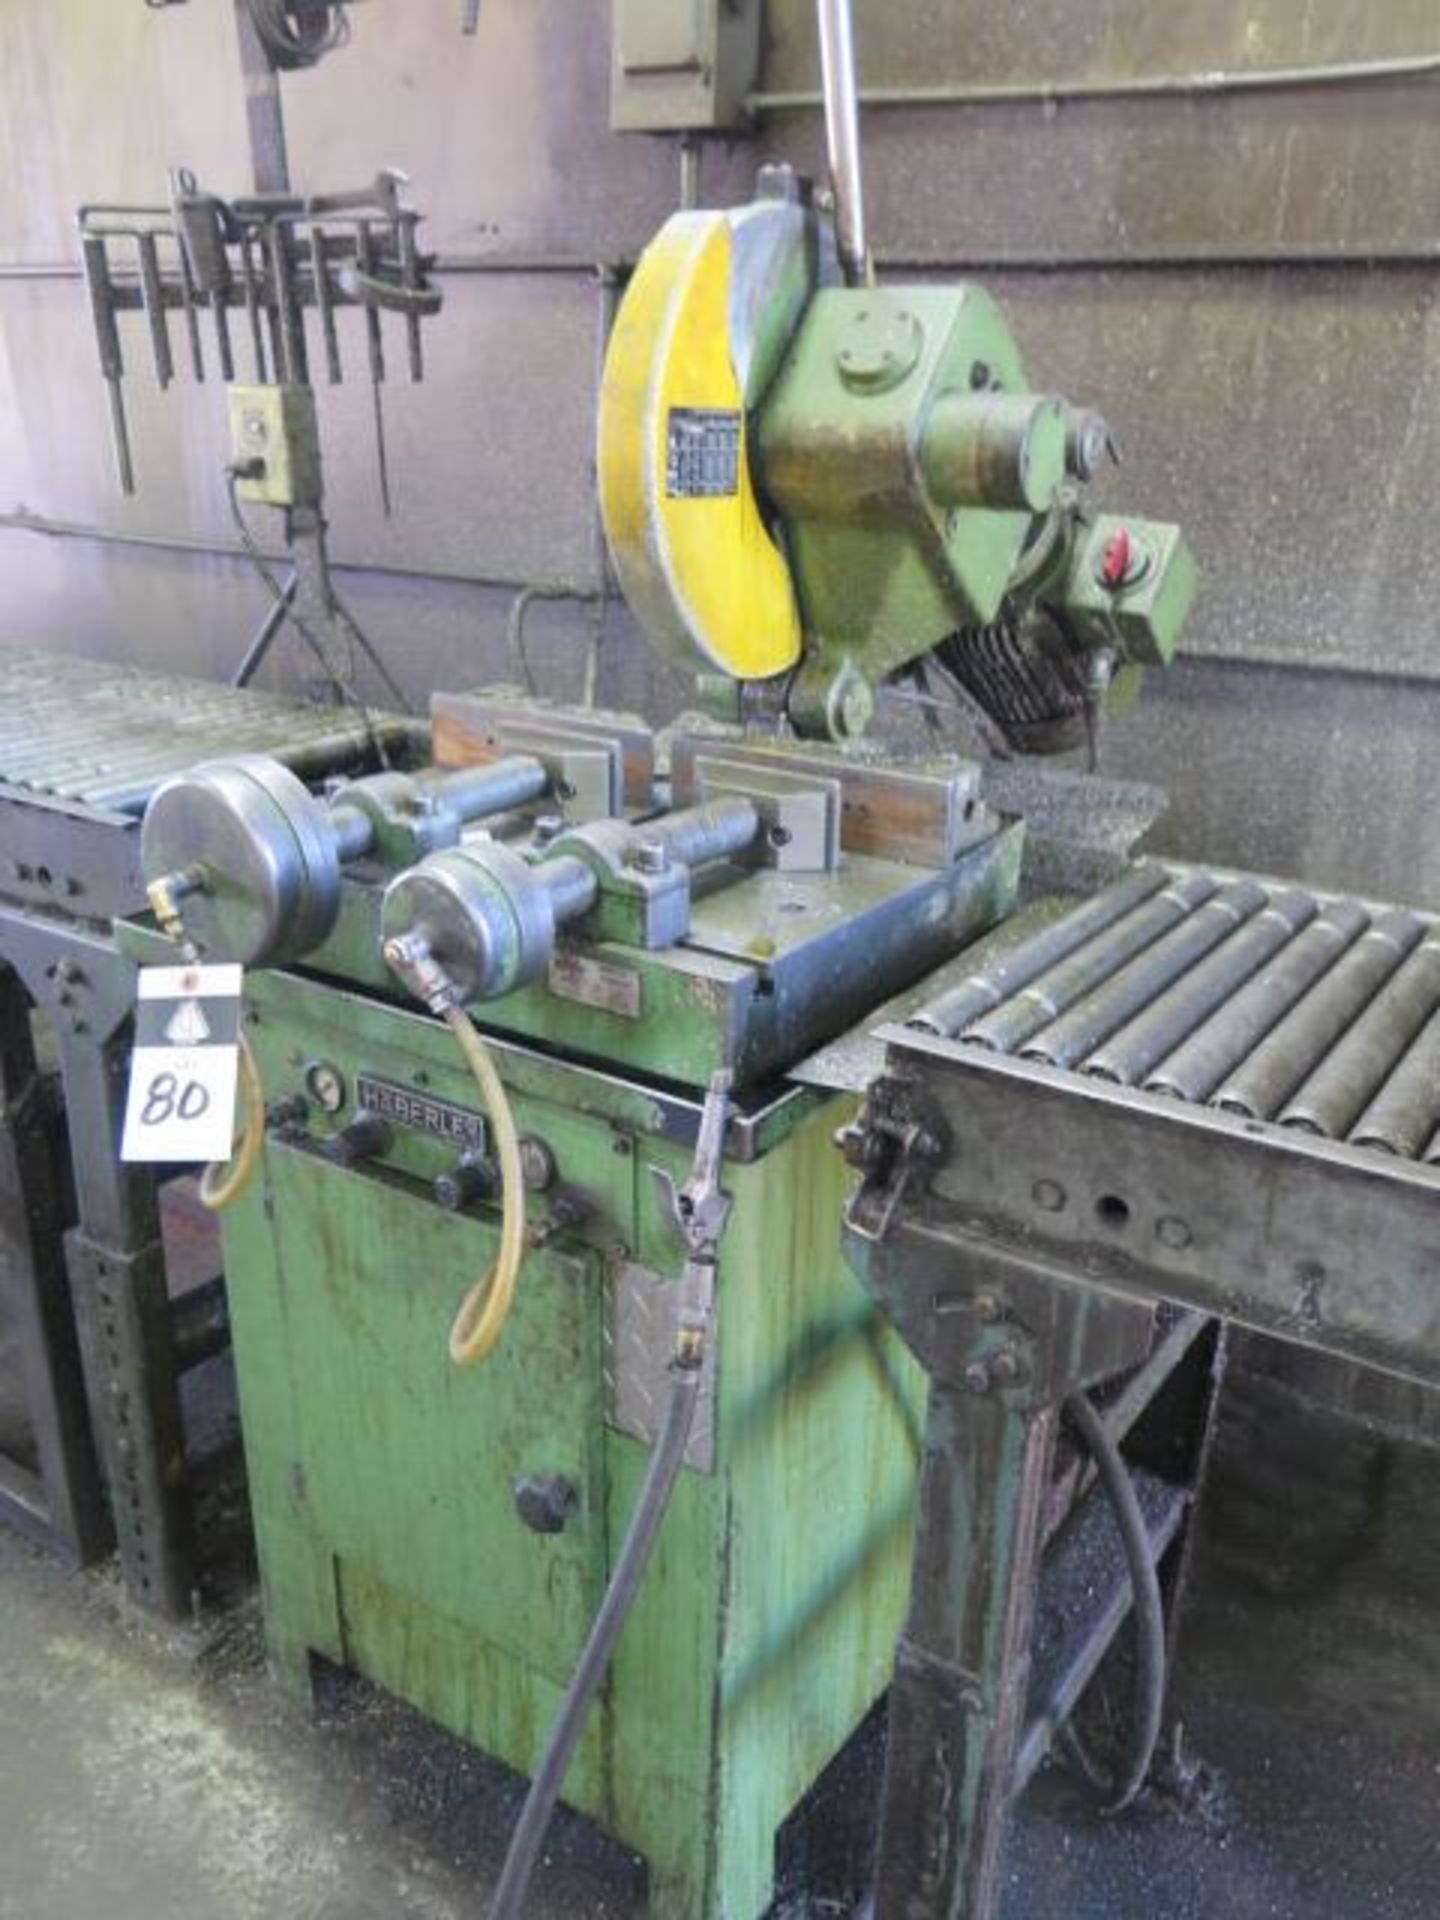 Haberle Miter Cold Saw w/ Pneumatic Clamping, Coolant, Conveyors (SOLD AS-IS - NO WARRANTY) - Image 2 of 13